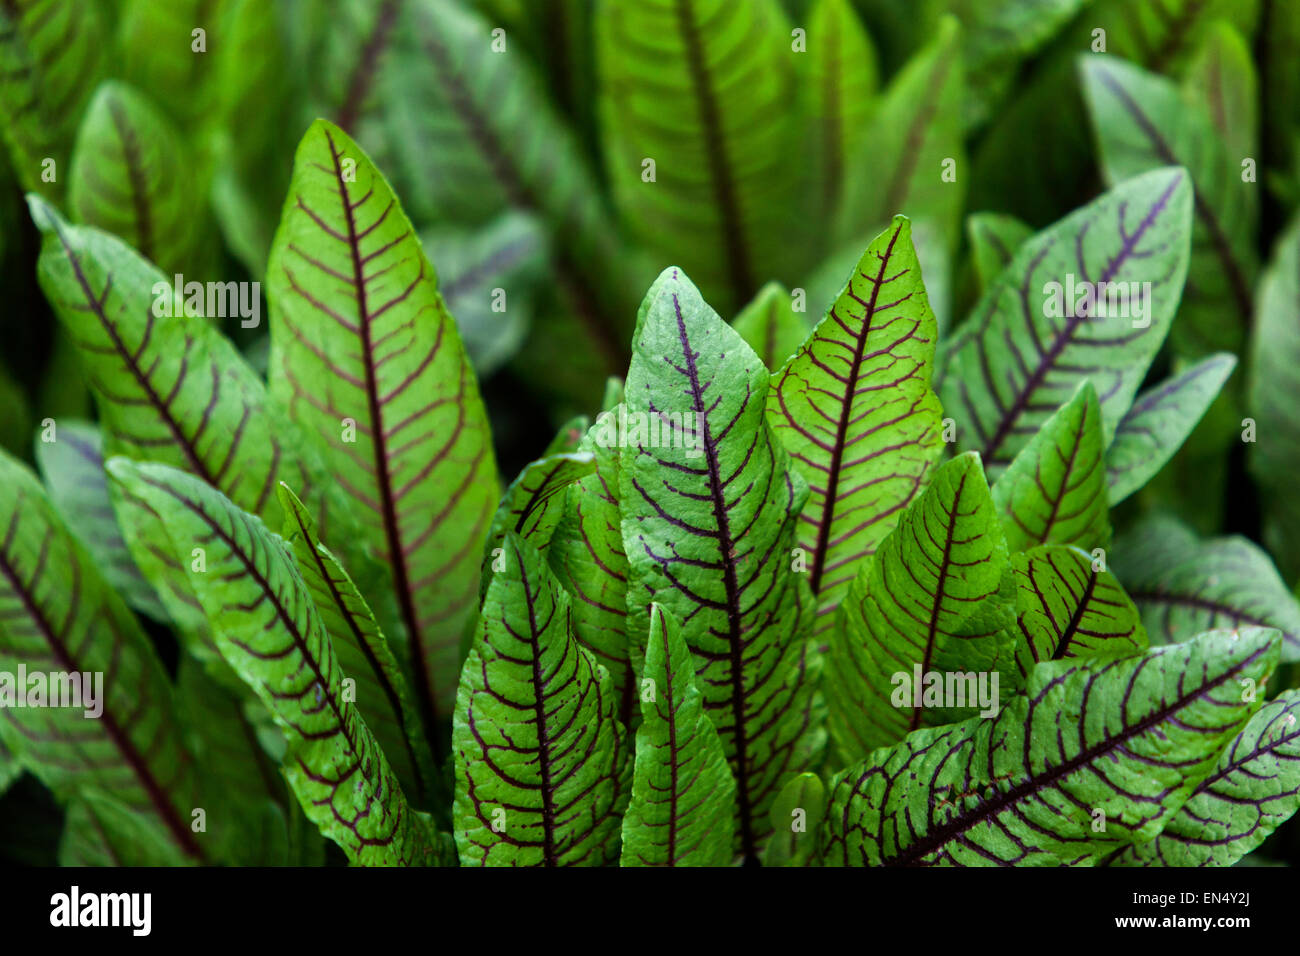 Bloody dock, Rumex sanguineus tasty leaves to salads, vegetable garden herb culinary leaves Red-Veined Sorrel Stock Photo